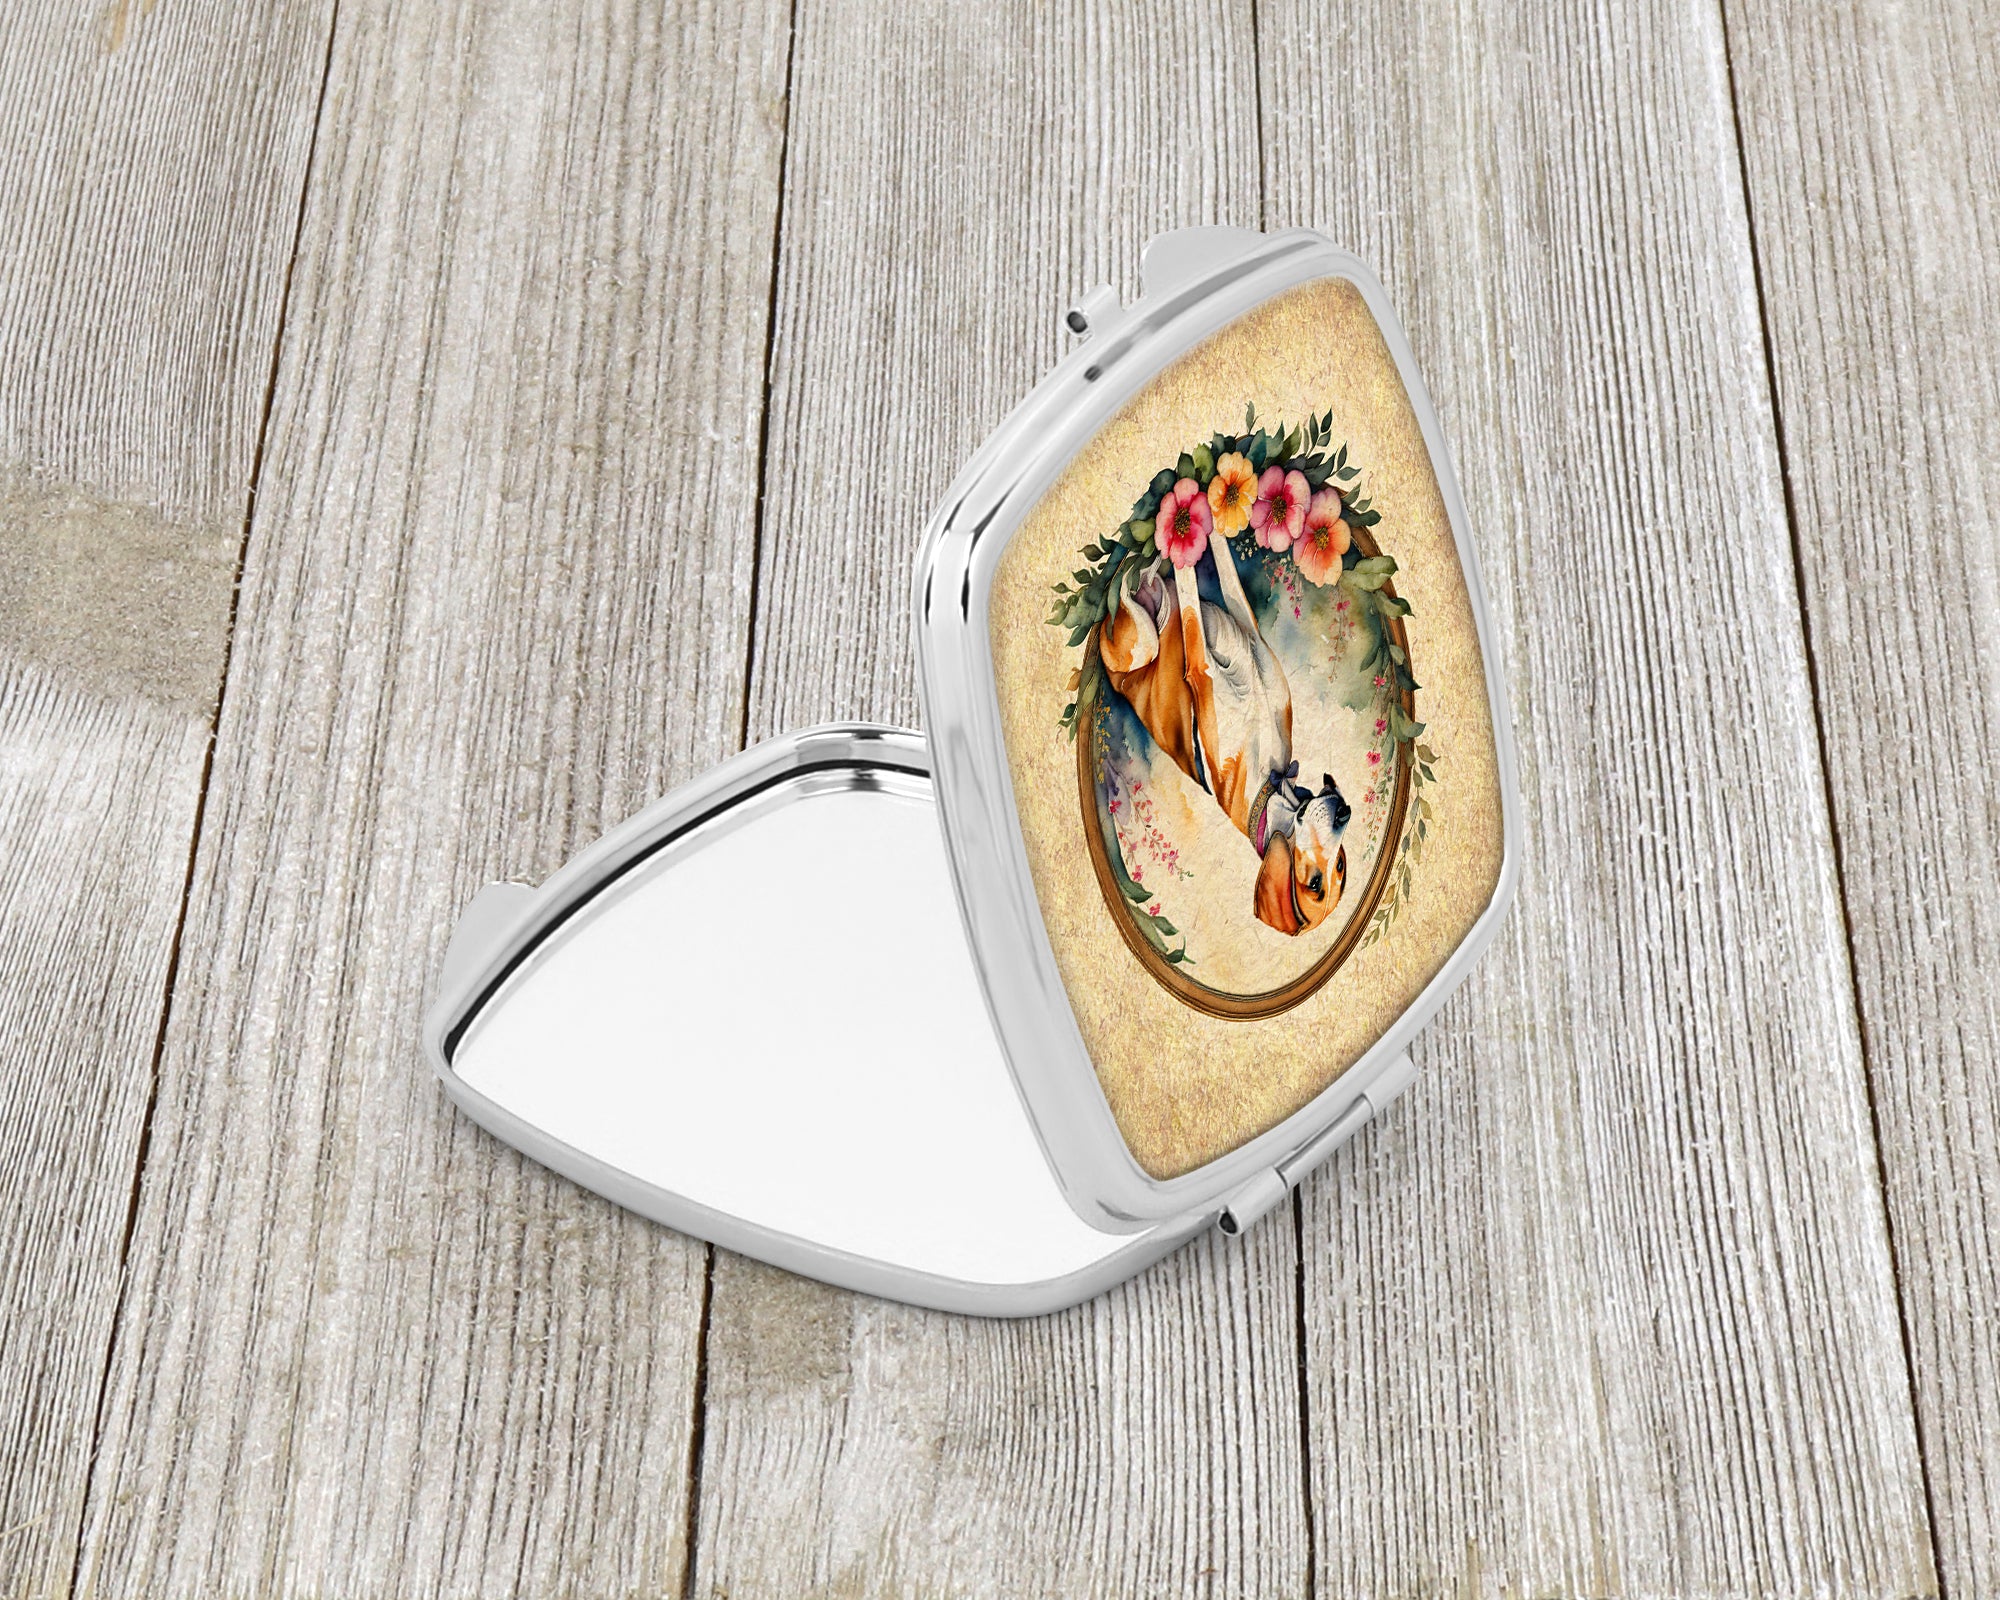 English Foxhound and Flowers Compact Mirror